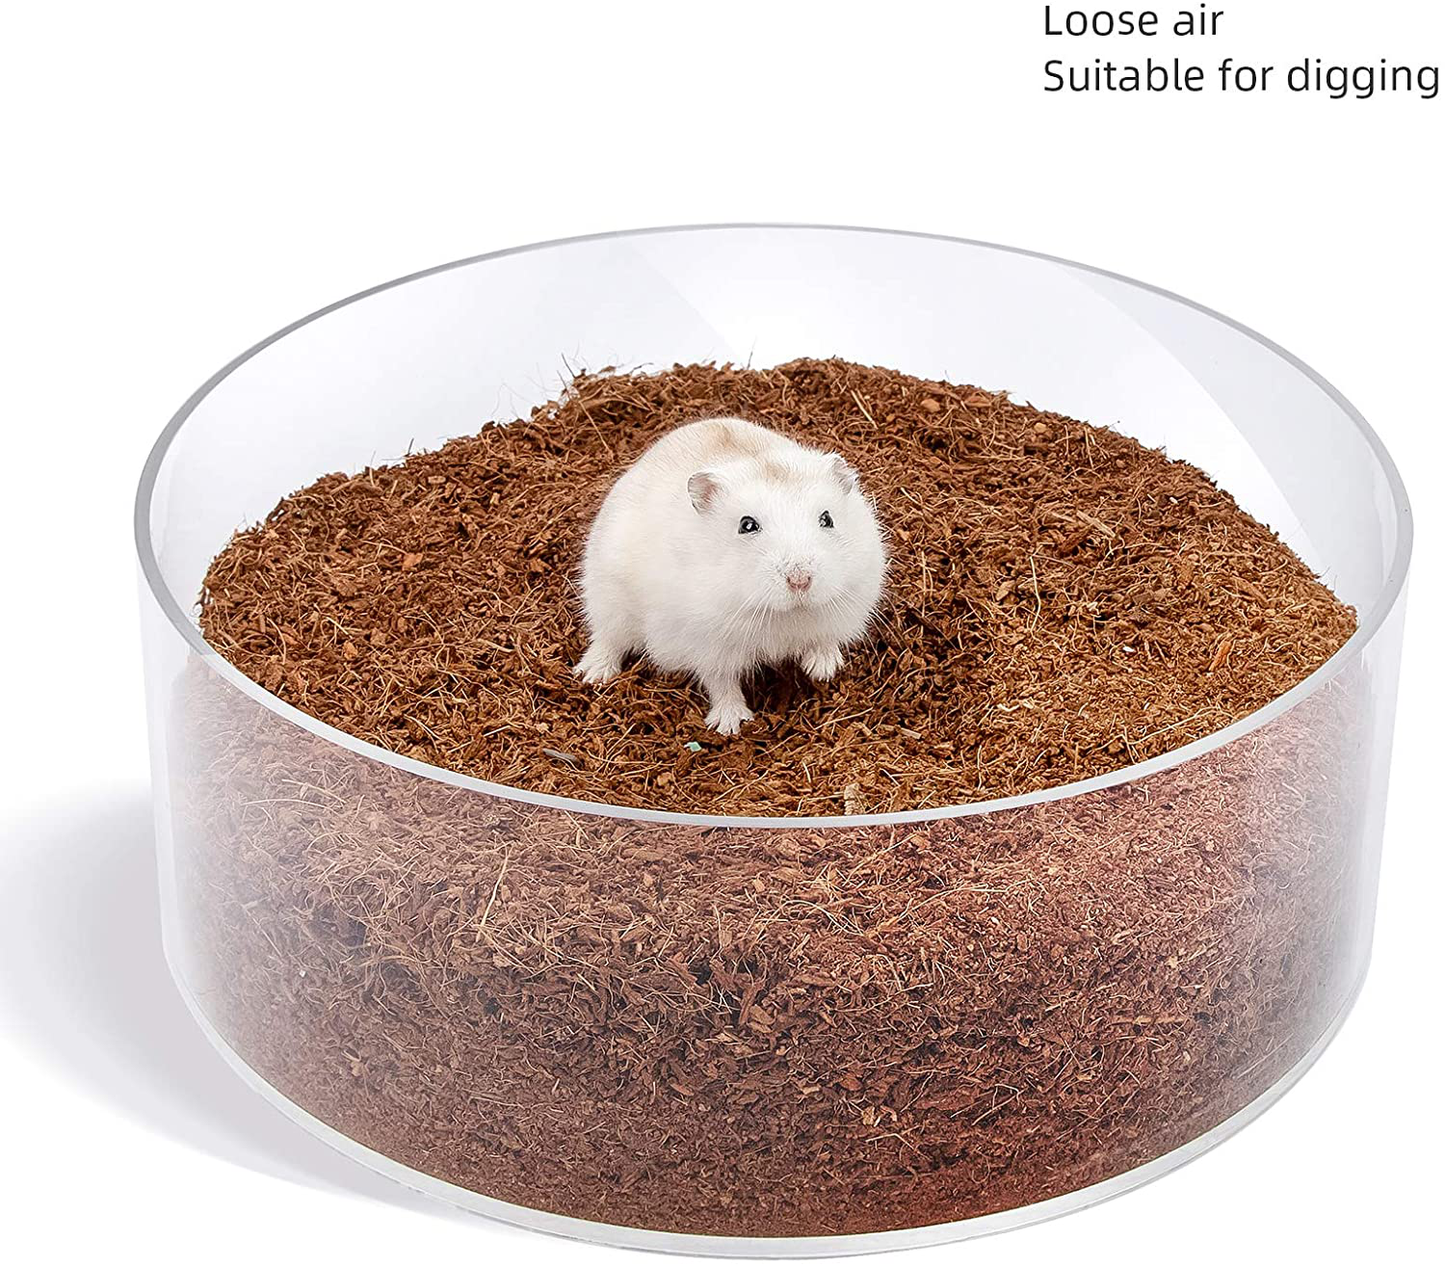 Niteangel Coco Peat & Chips Dry Digging & Burrowing Base for Rodent Pets